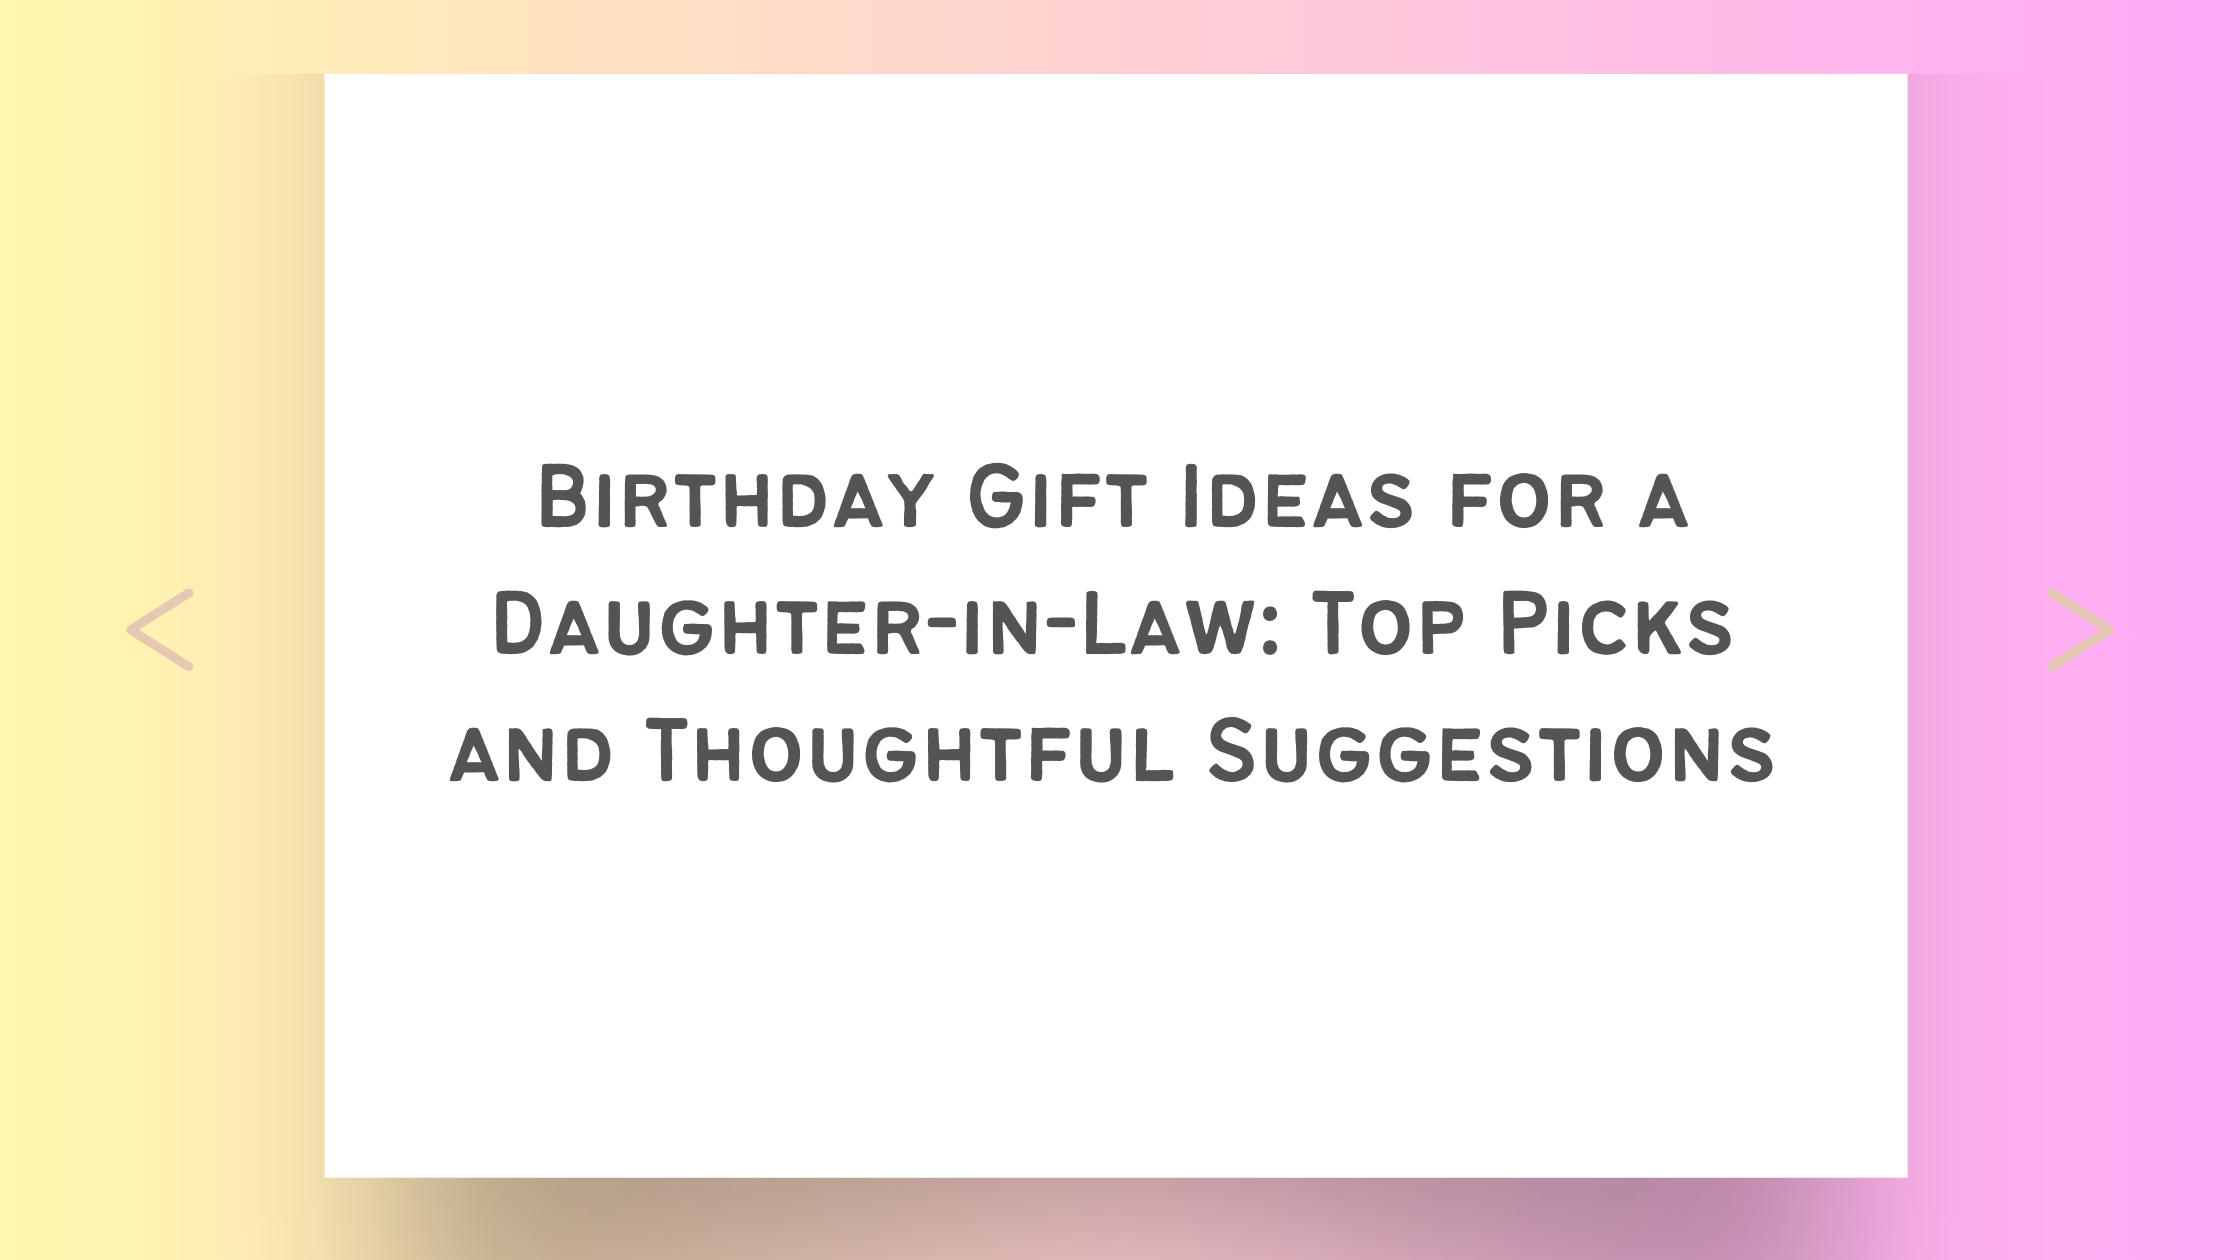 Birthday Gift Ideas for a Daughter-in-Law: Top Picks and Thoughtful Suggestions